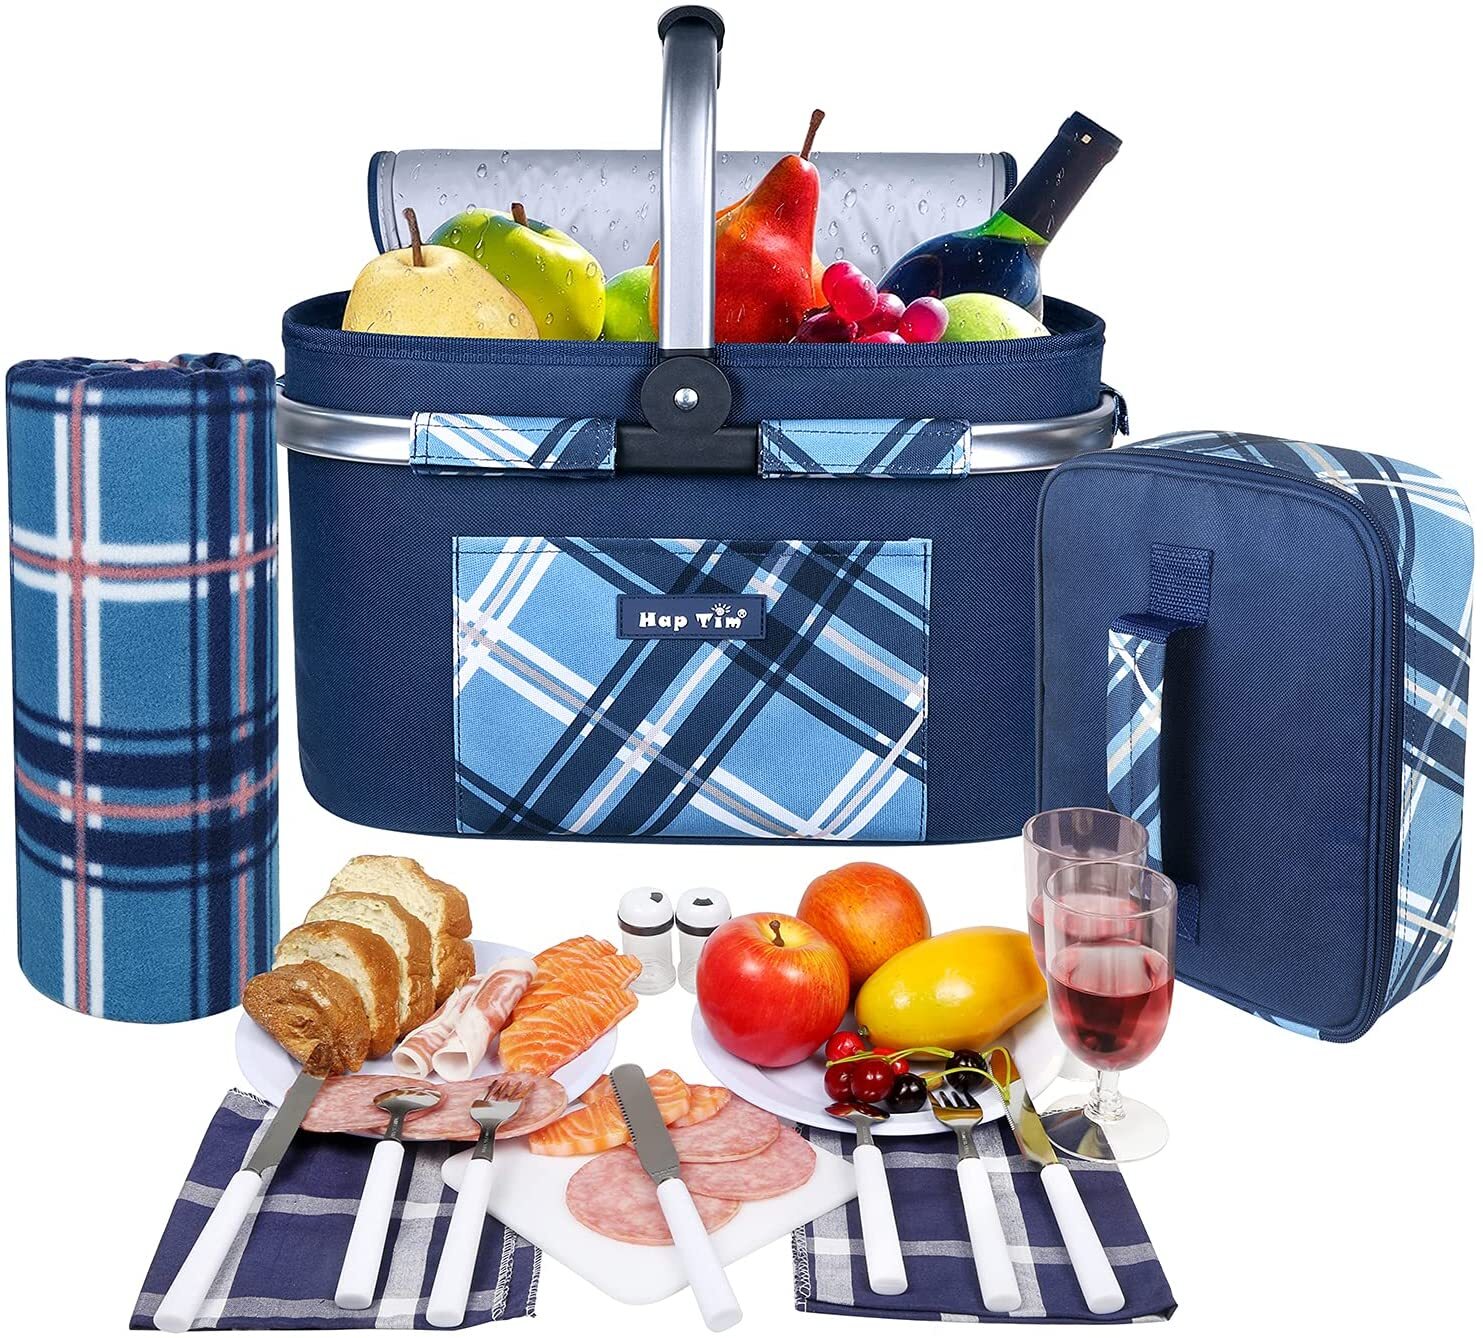 Hap Tim Picnic Basket Backpack for 2 Person with Insulated Cooler  Compartment,Wine Holder,Fleece Bla…See more Hap Tim Picnic Basket Backpack  for 2